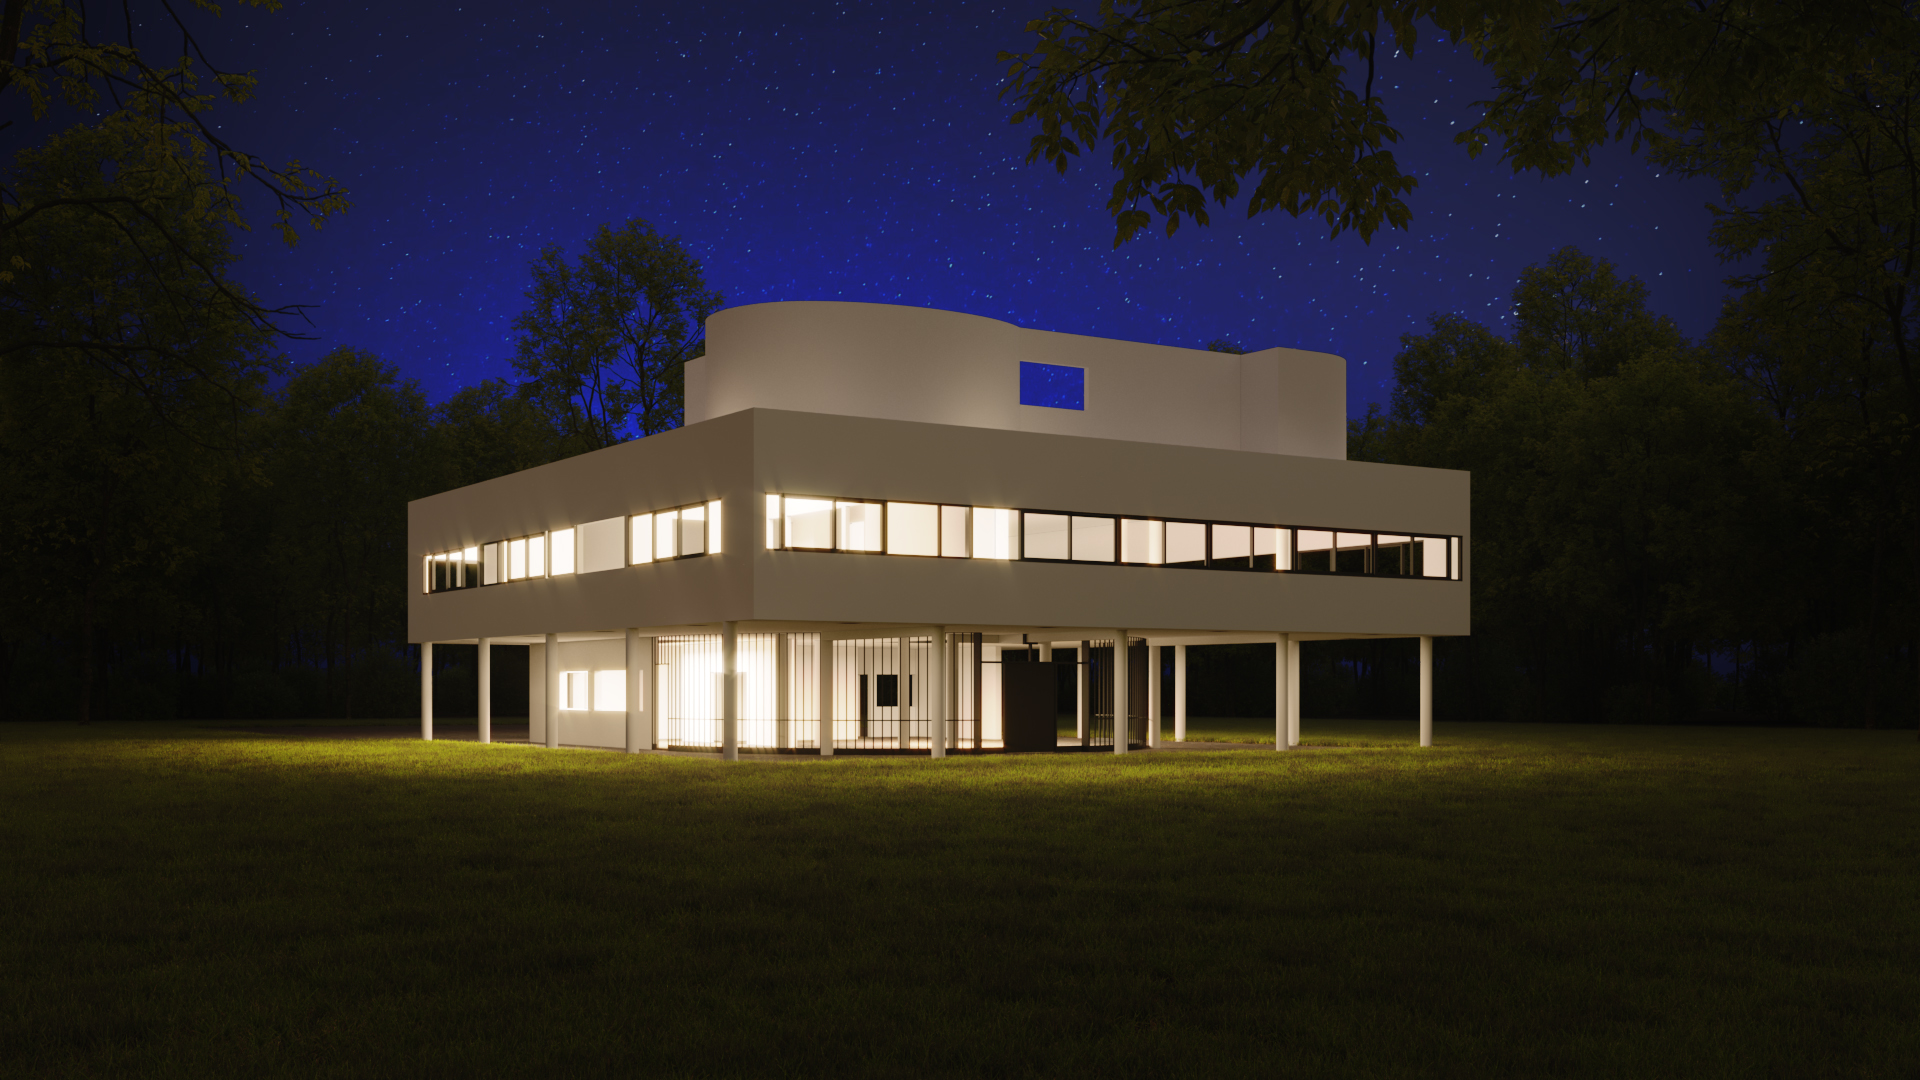 CG Exterior Render Showing a Modern Building in Nighttime